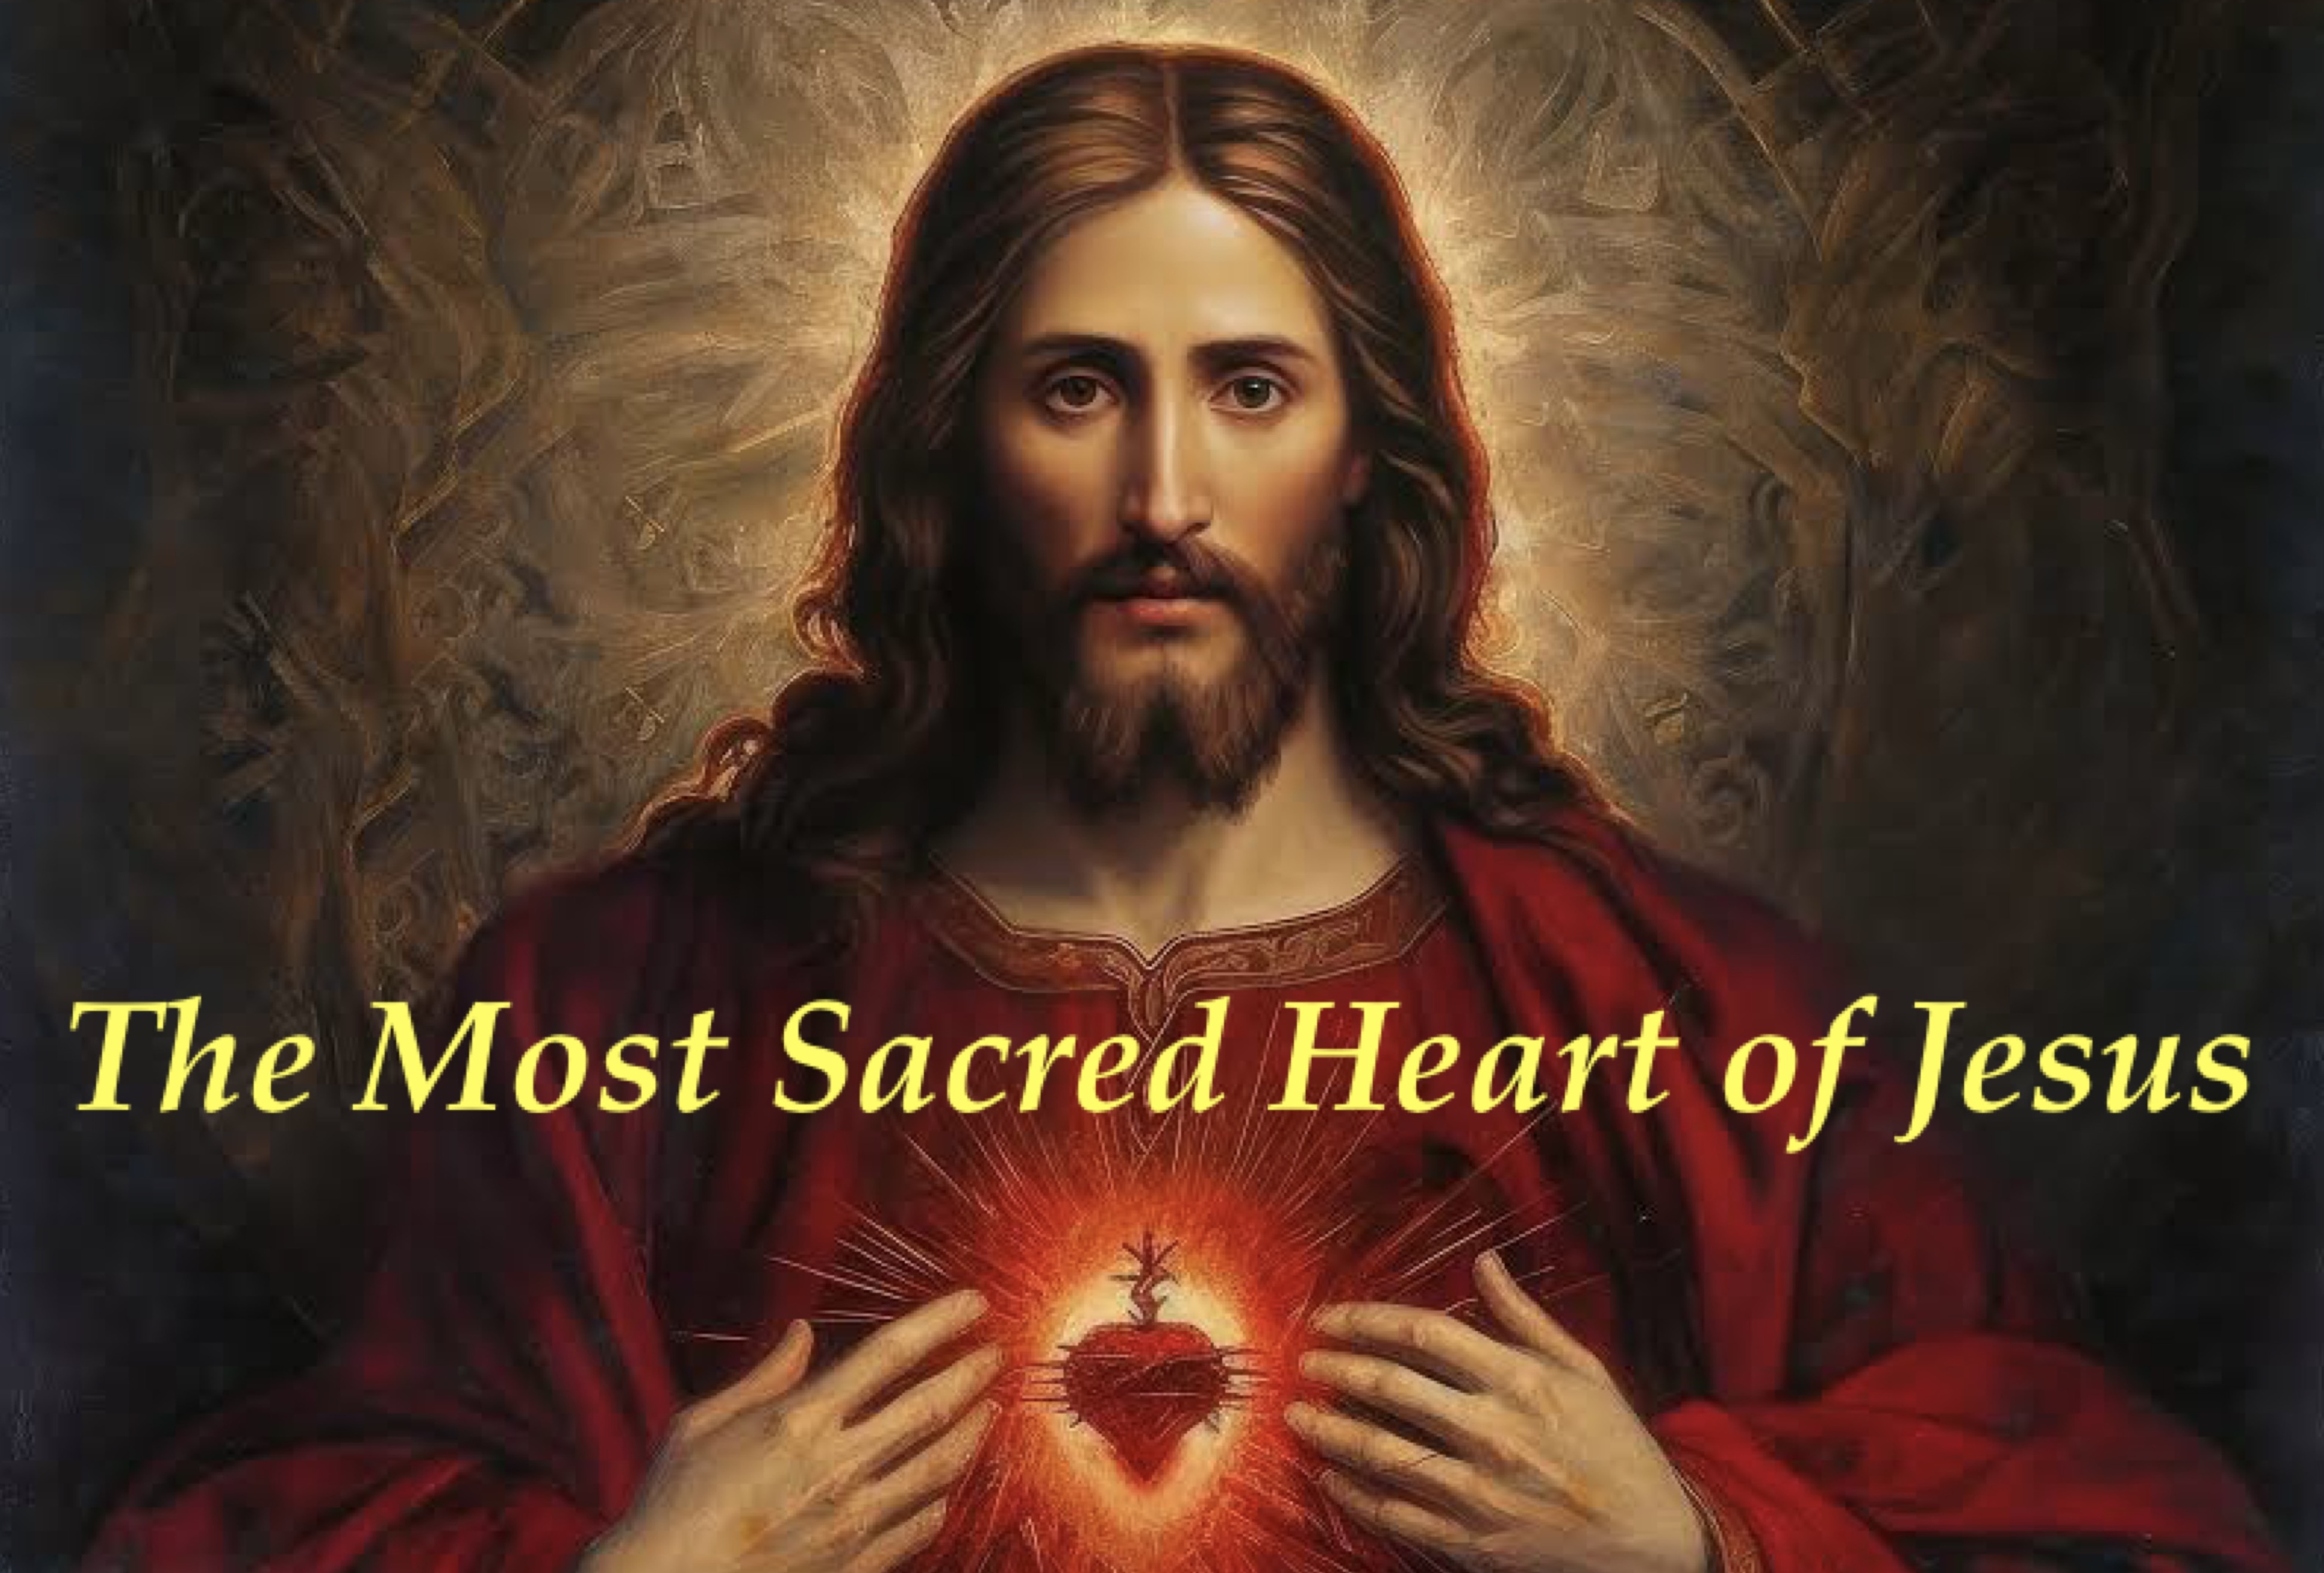 16th June - The Most Sacred Heart of Jesus